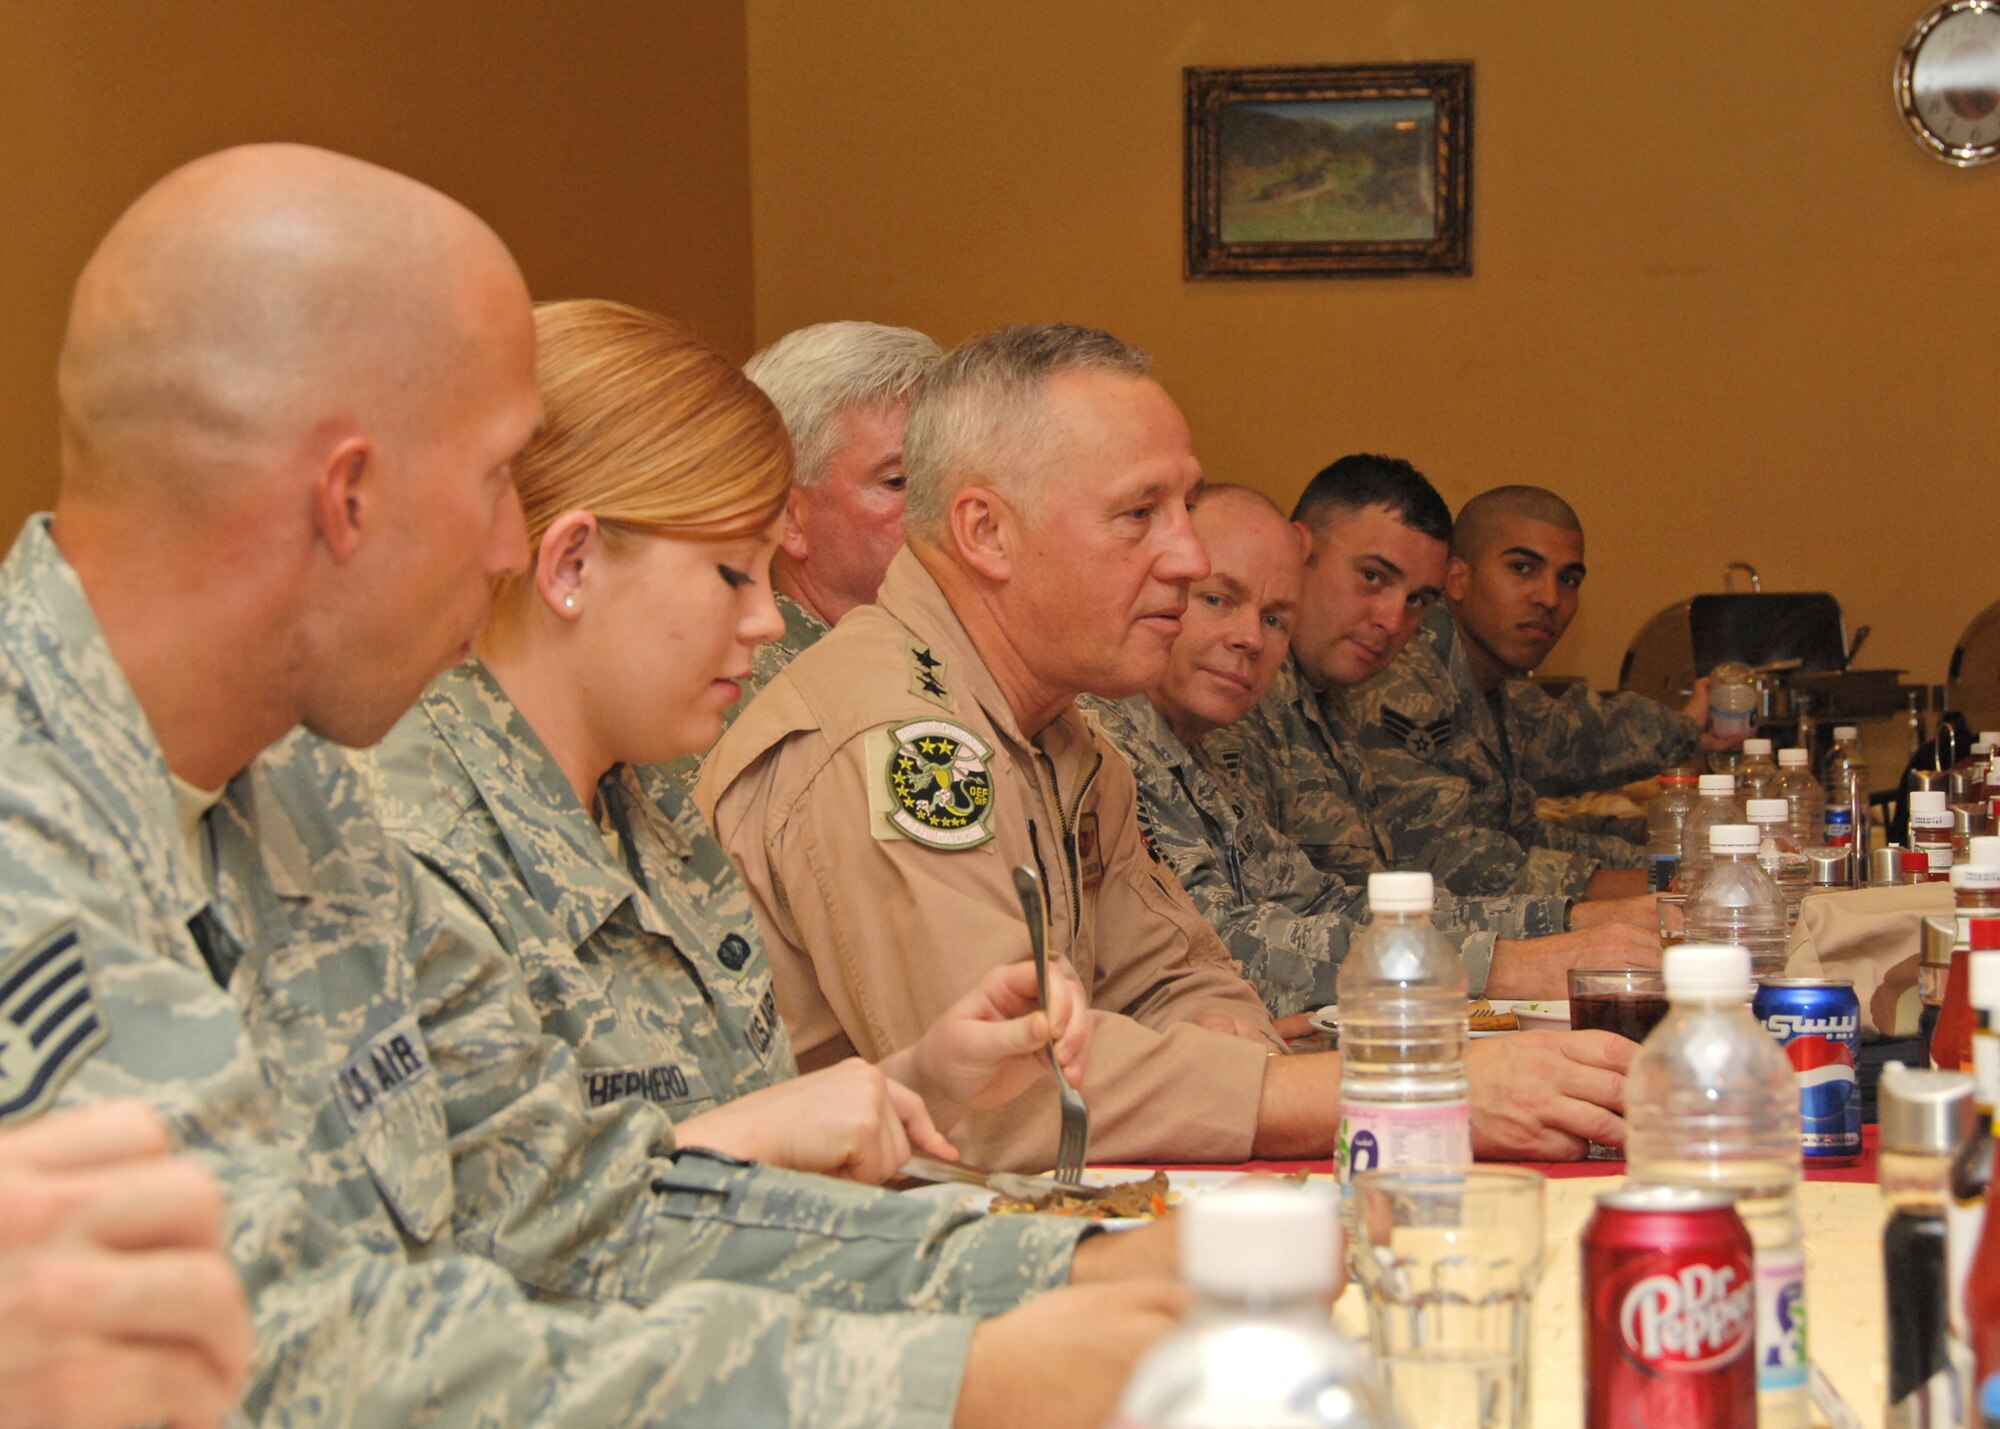 SOUTHWEST ASIA -- Gen. Bruce Carlson, commander of Air Force Materiel Command, meets with enlisted members of the 386th Air Expeditionary Wing to answer questions and discuss various issues affecting the Air Force on Aug. 18 at an air base in Southwest Asia. General Carlson met with members of the 386th Air Expeditionary Wing to see how AFMC can assist with current operations in the U.S. Central Command area of responsibility. (U.S. Air Force photo/Tech. Sgt. Raheem Moore)